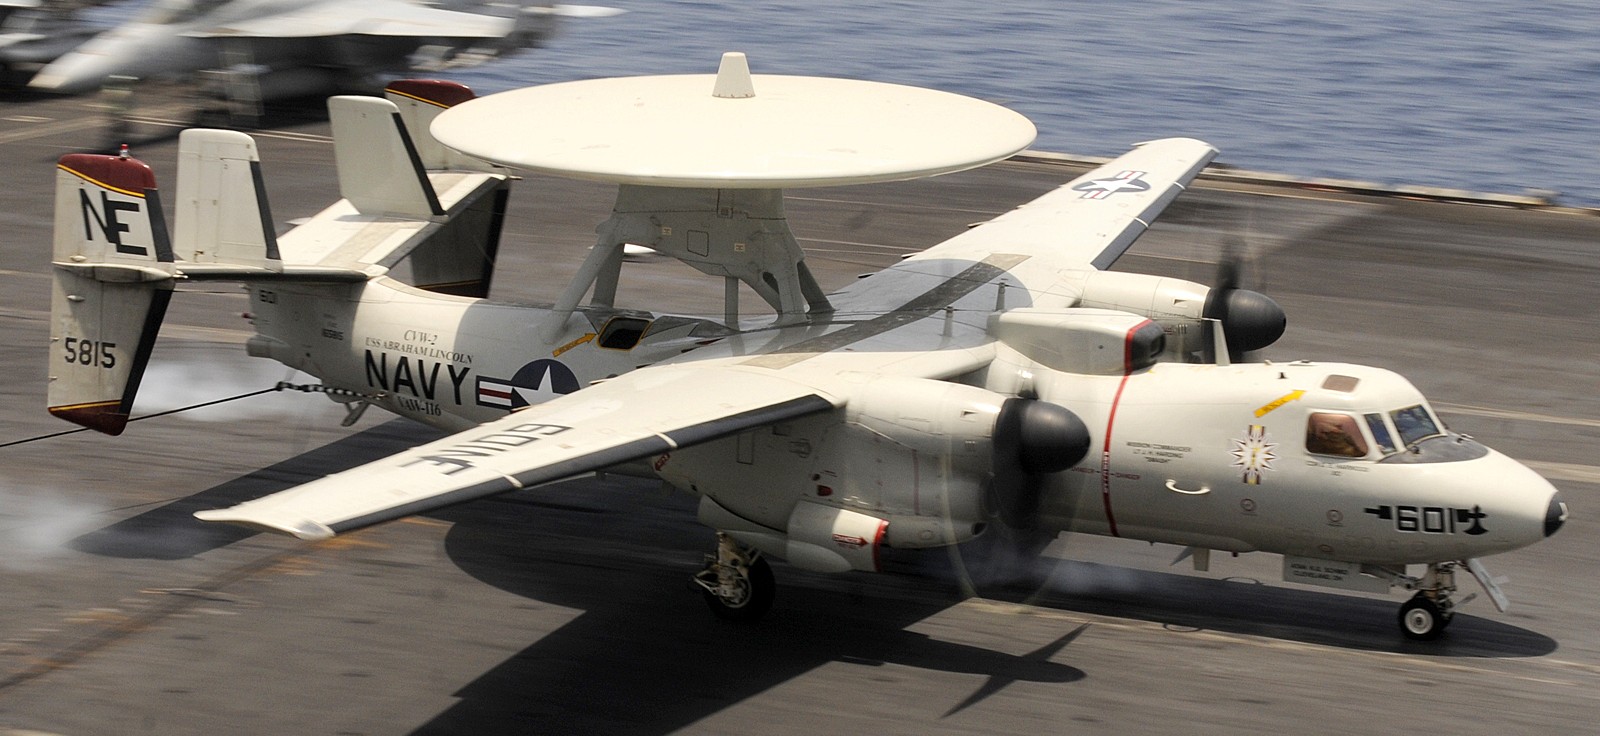 vaw-116 sun kings airborne command control squadron carrier early warning cvw-2 uss abraham lincoln cvn-72 32